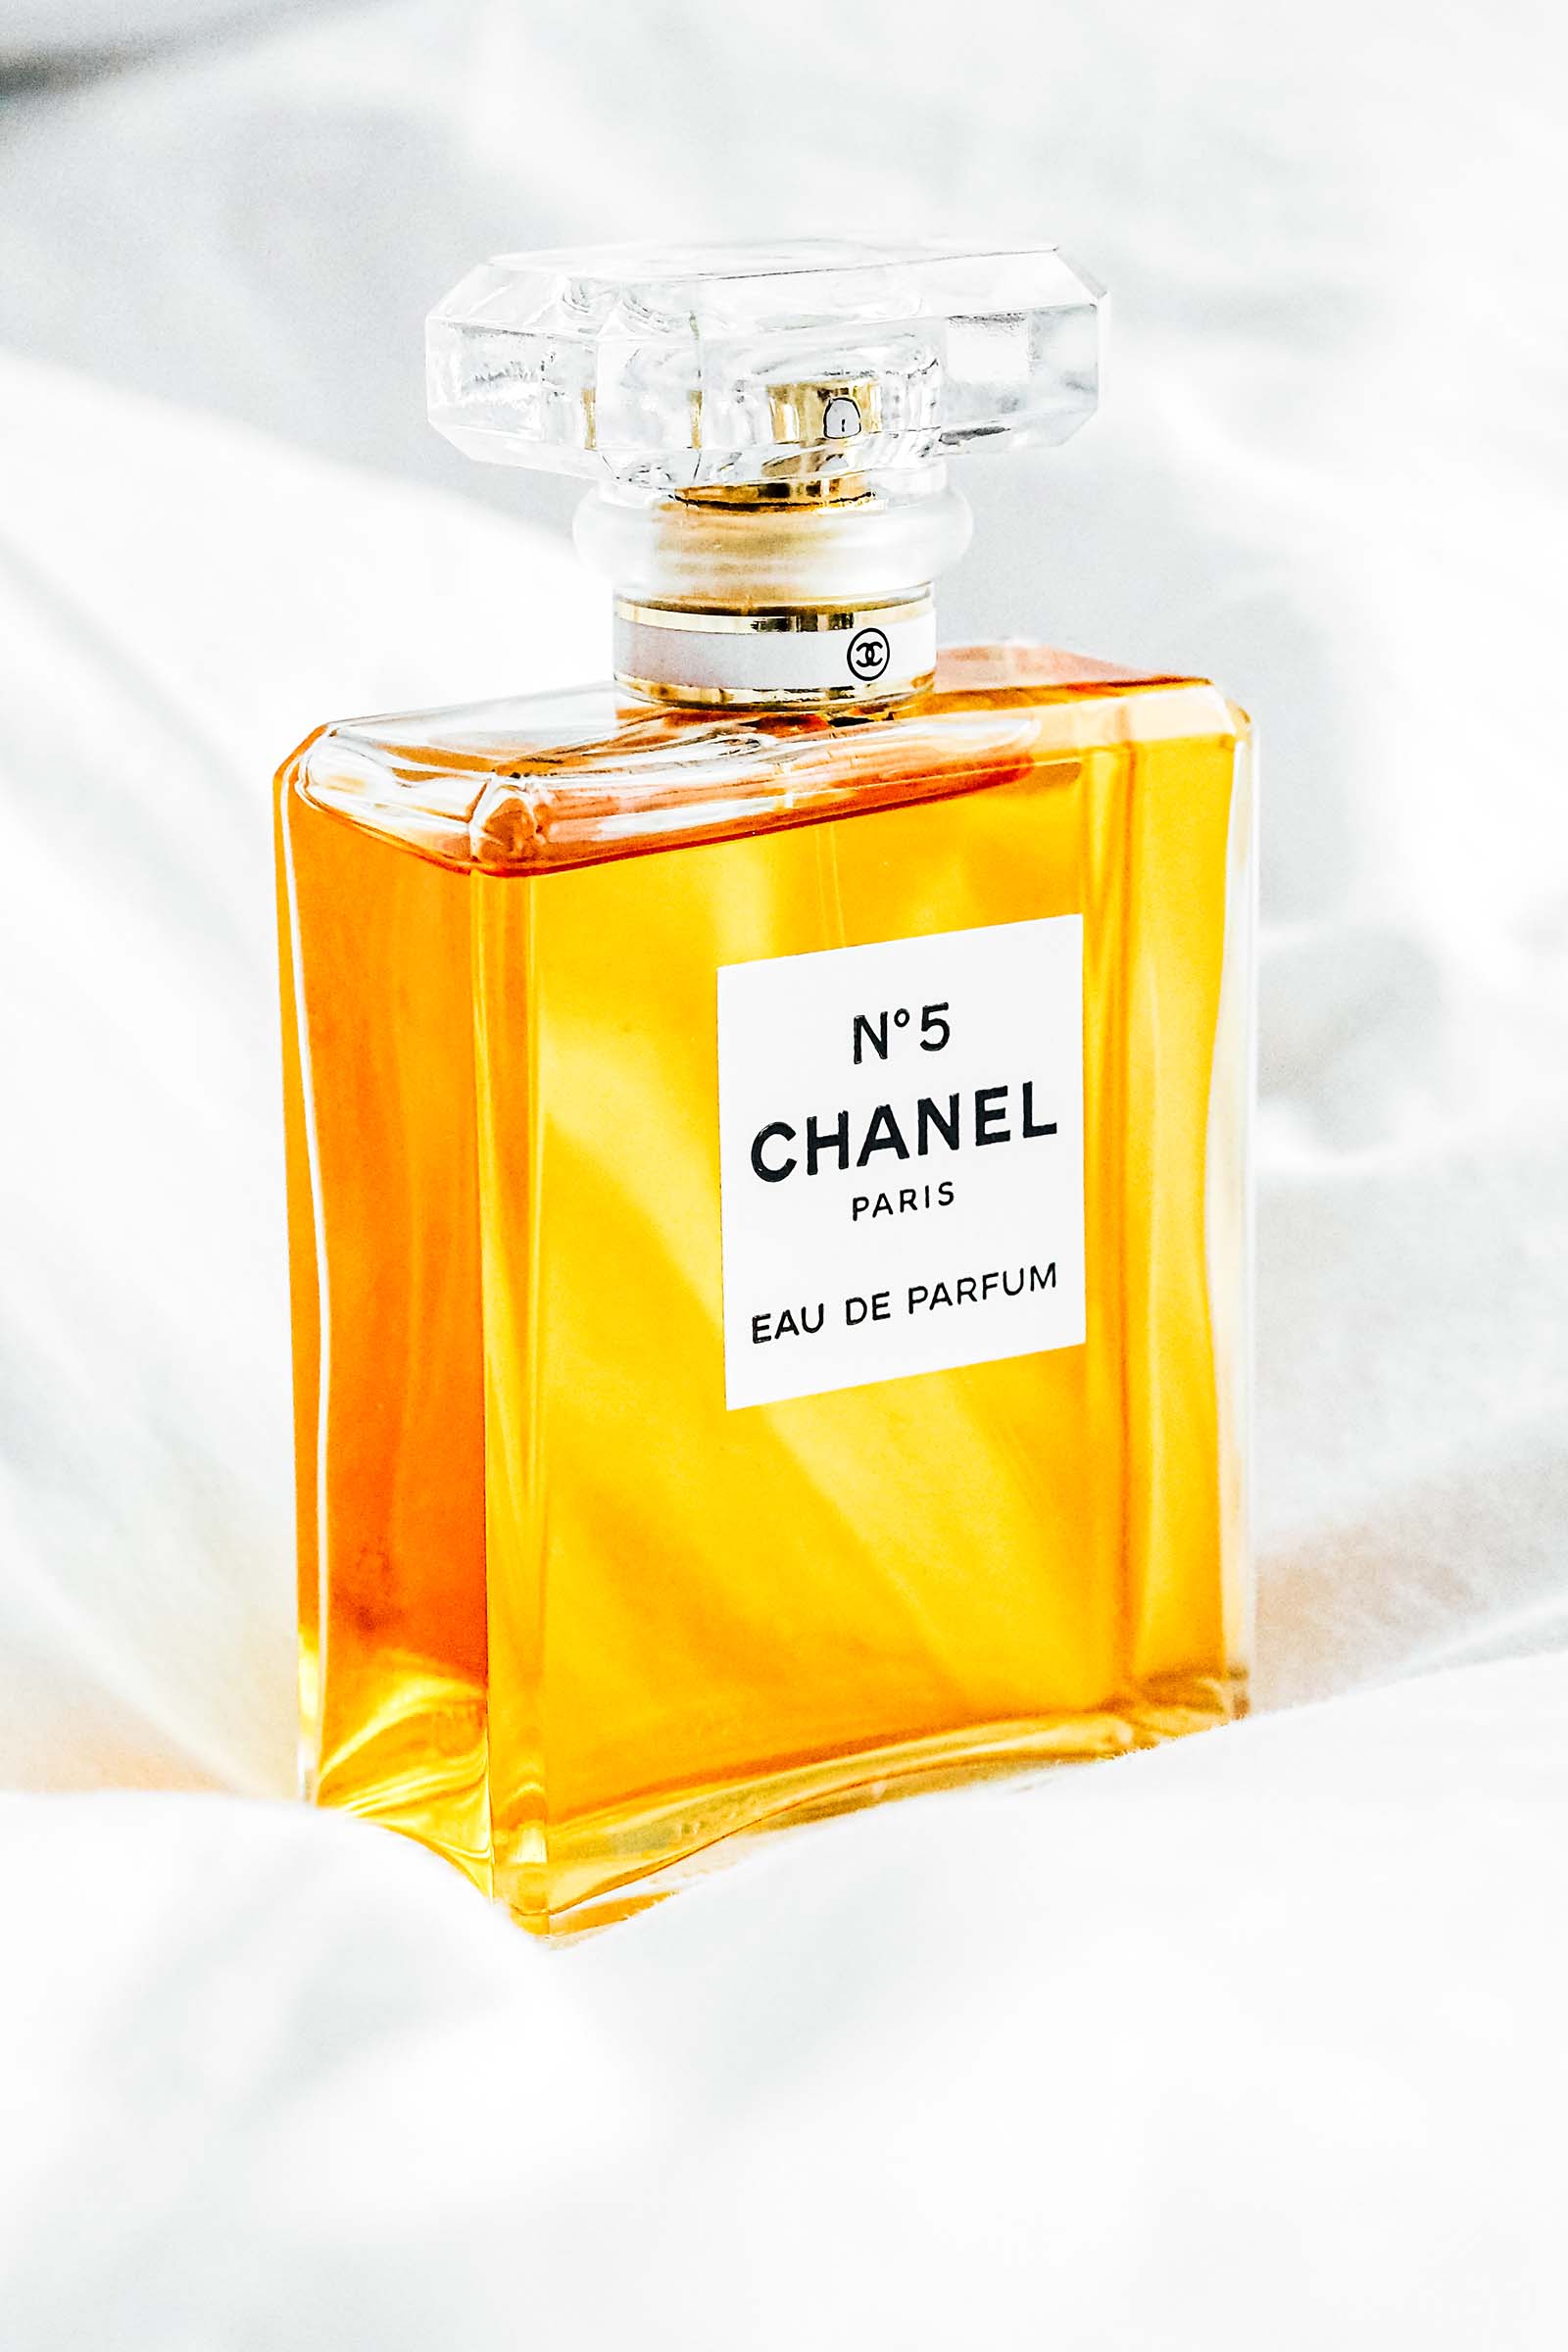 12 startling secrets you still don't know about Chanel No. 5 (even after  100 years!)